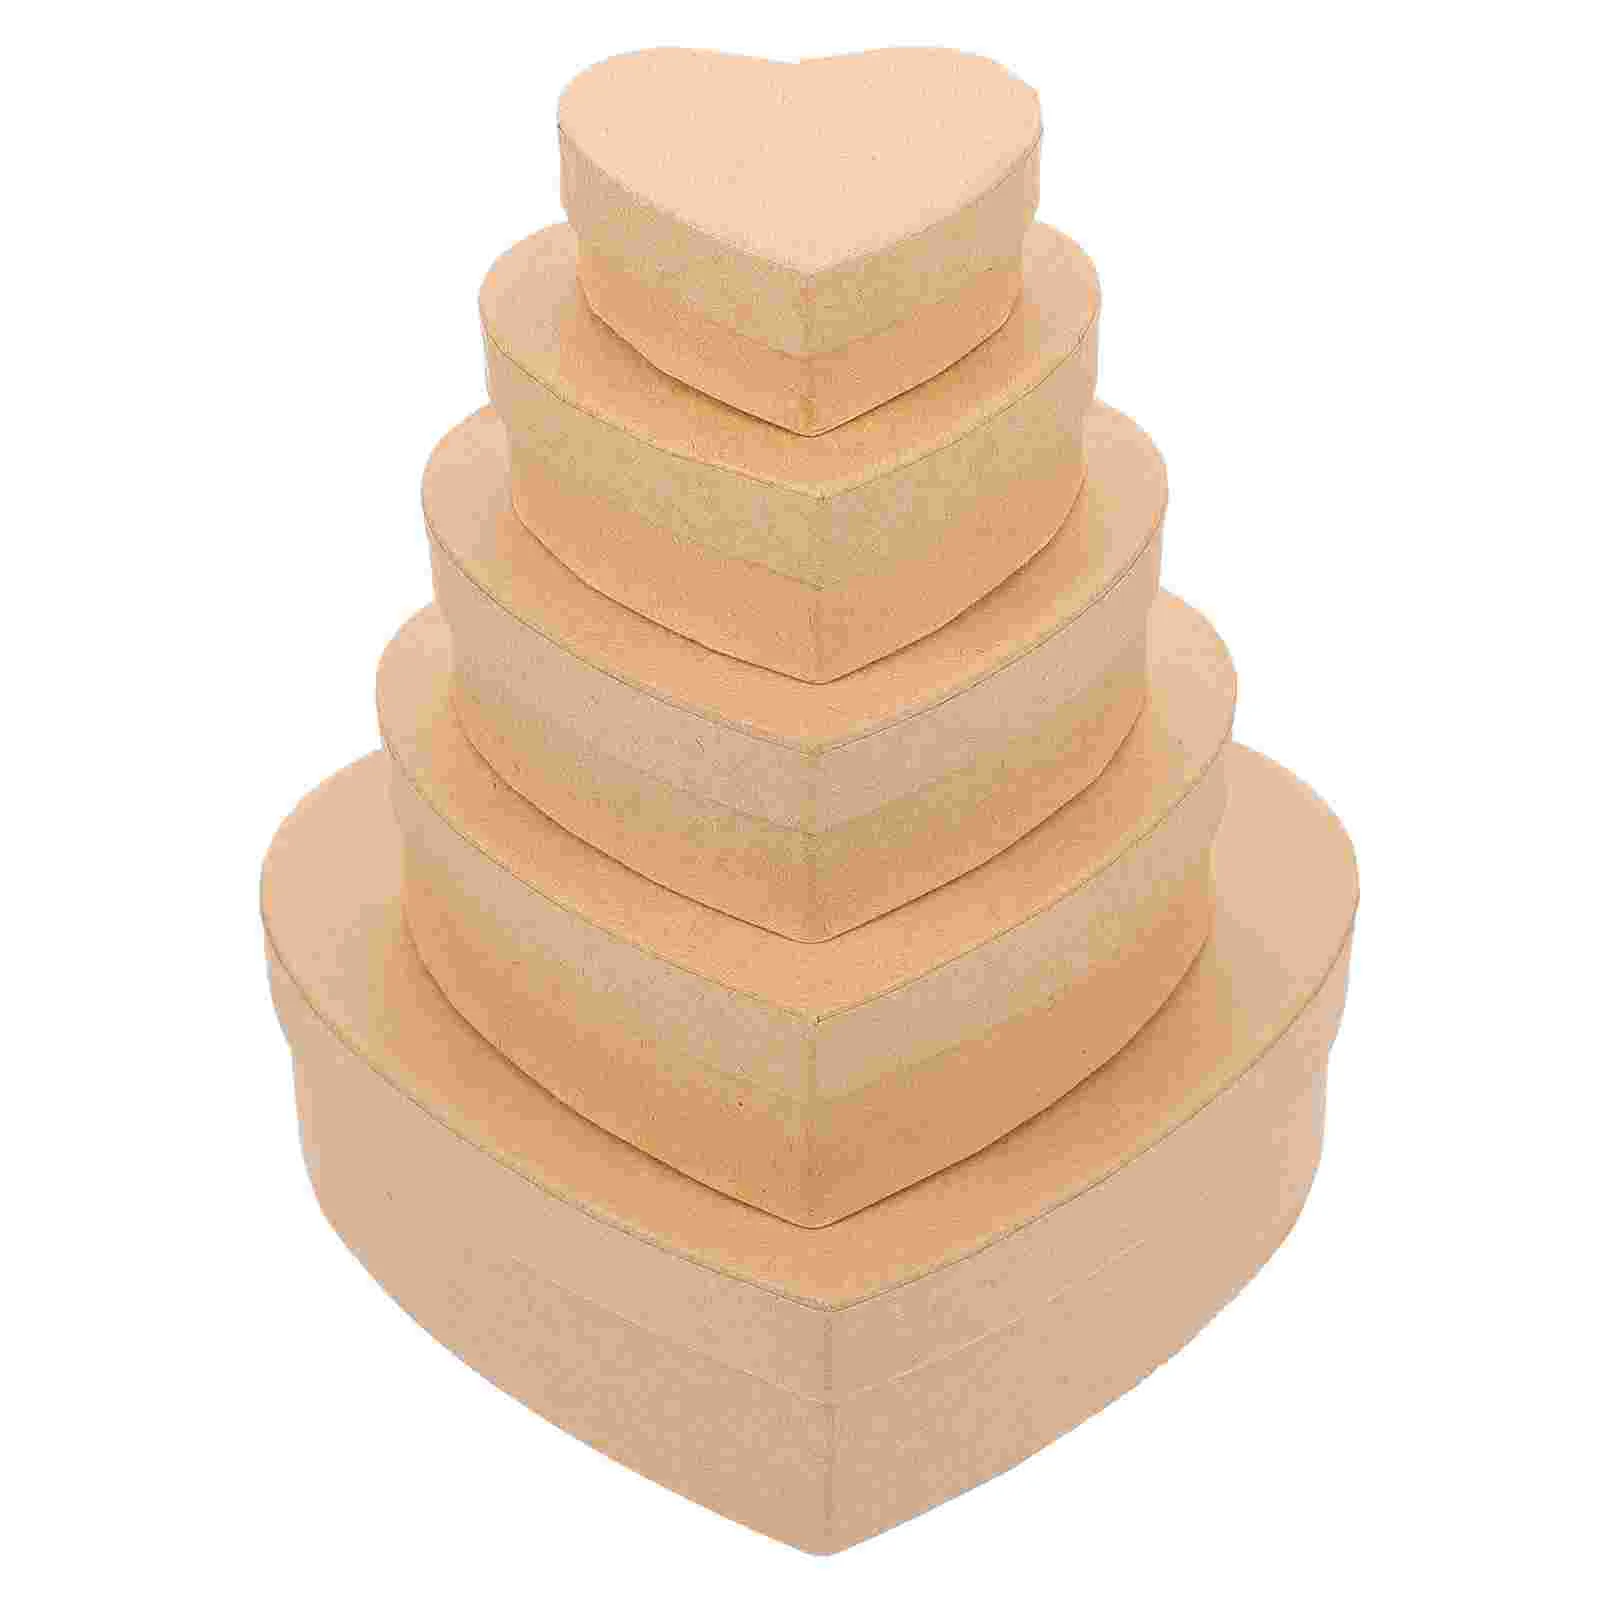 

5 Pcs Love Kraft Paper Box Backing Cake Case Dessert Packing Boxes Cupcake Containers Wedding Snacks Holder Gift Decor